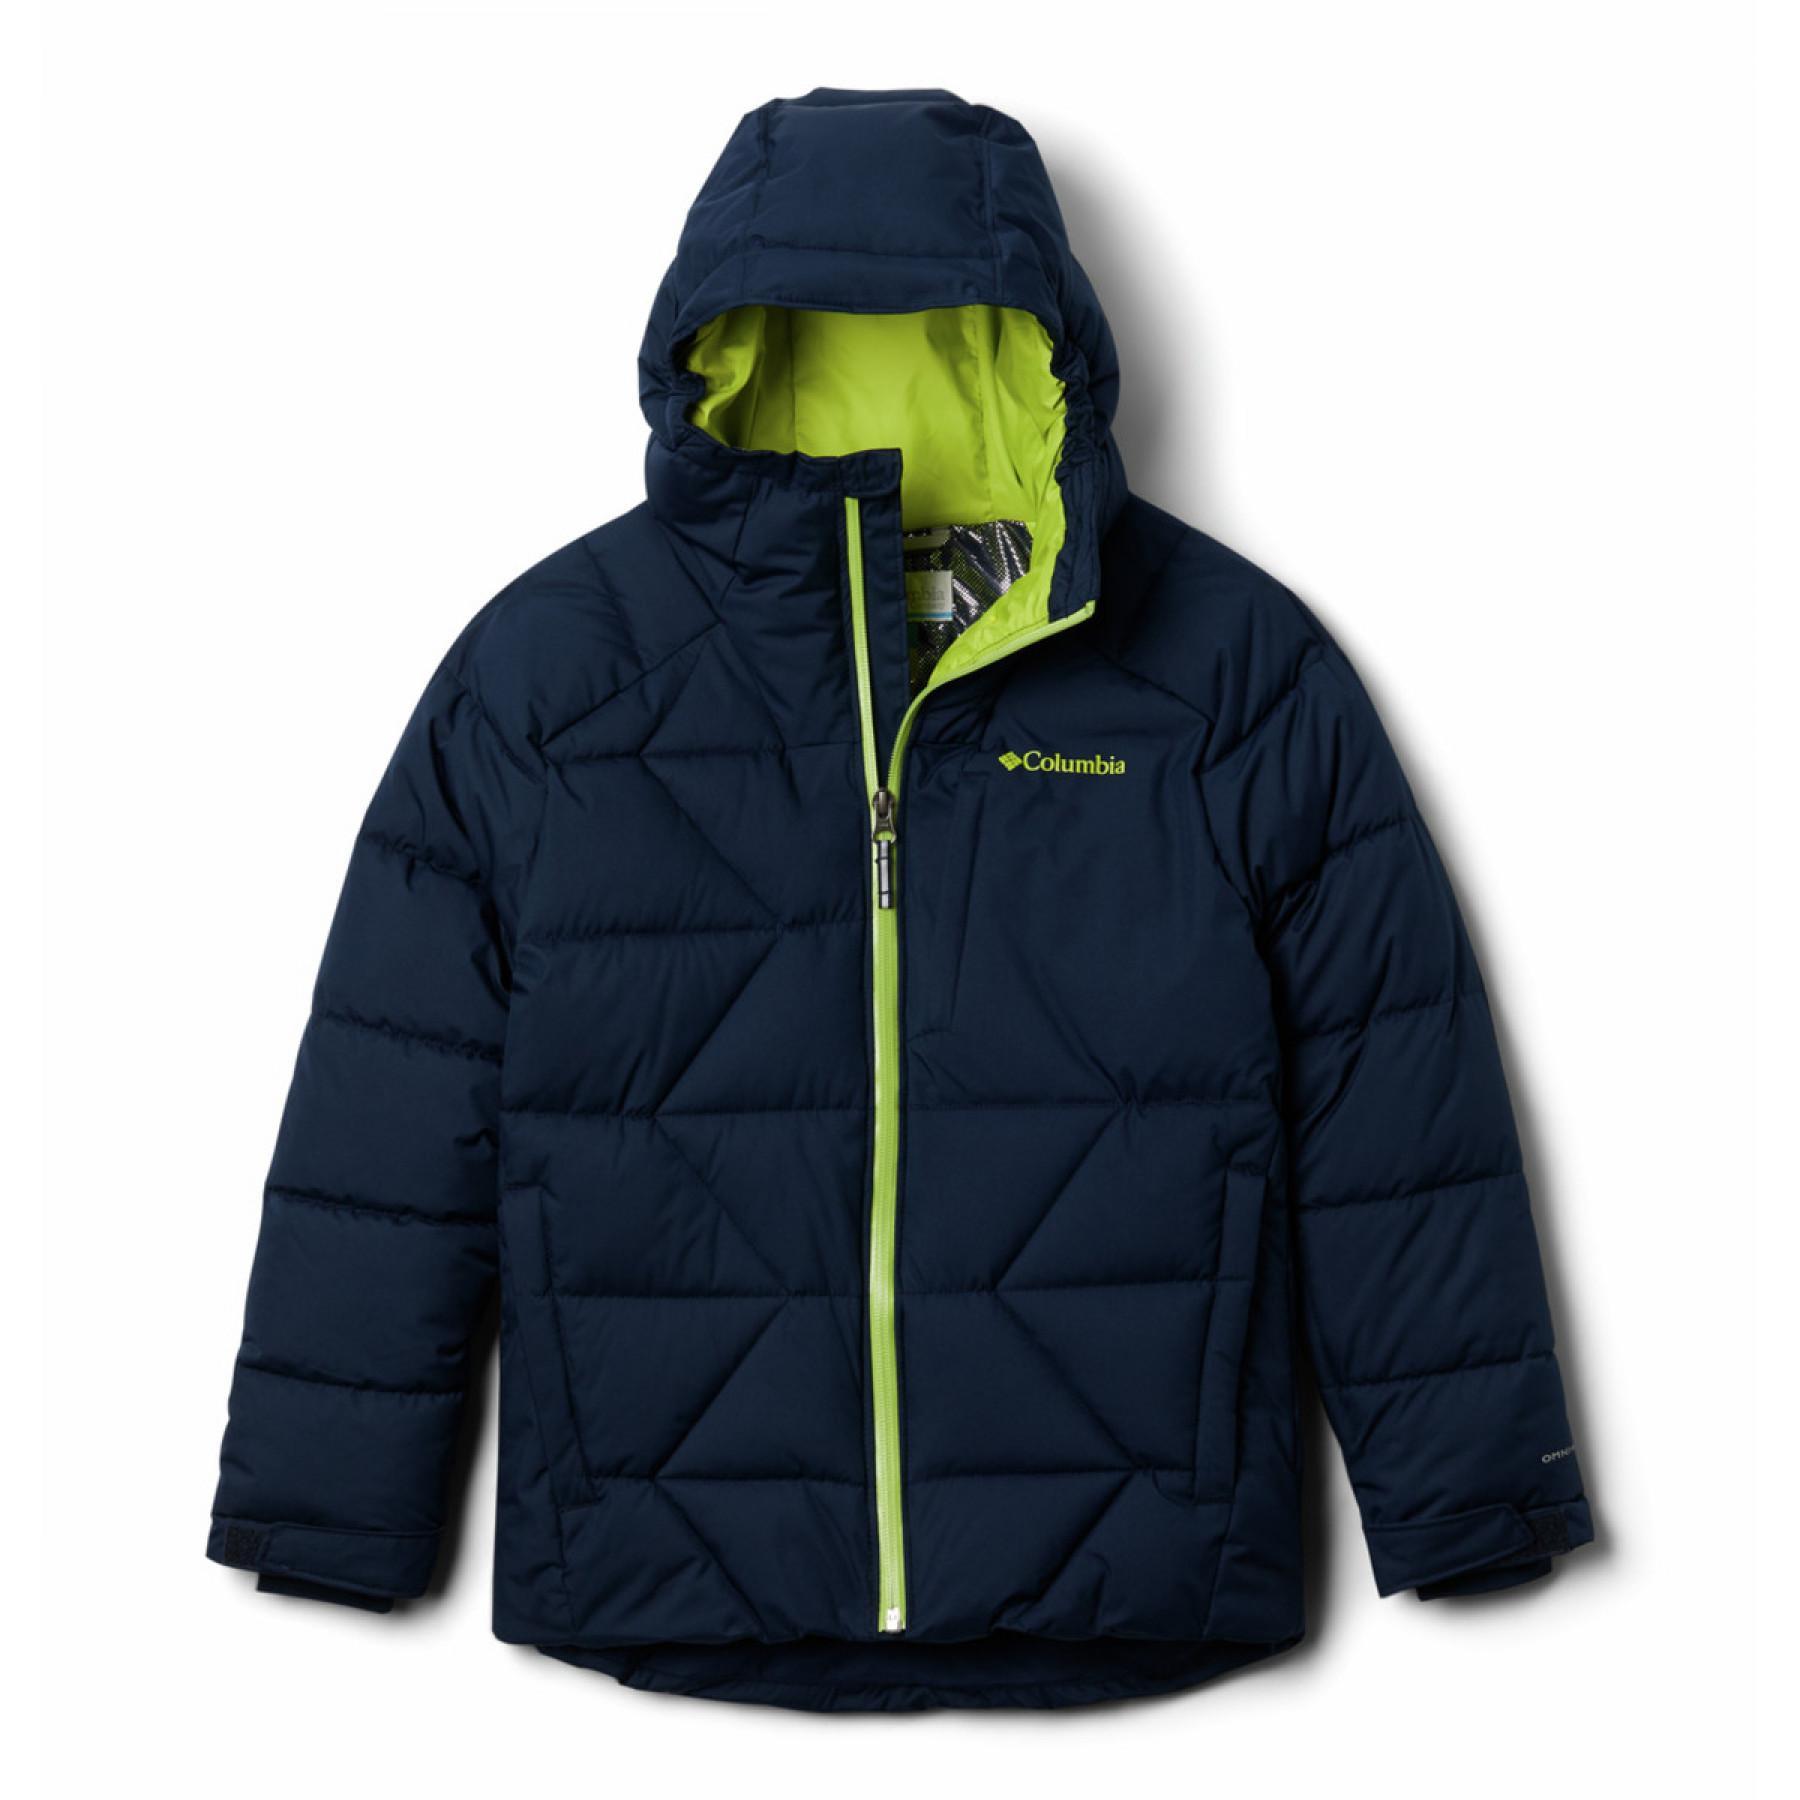 Kinderjas Columbia Winter Powder Quilted